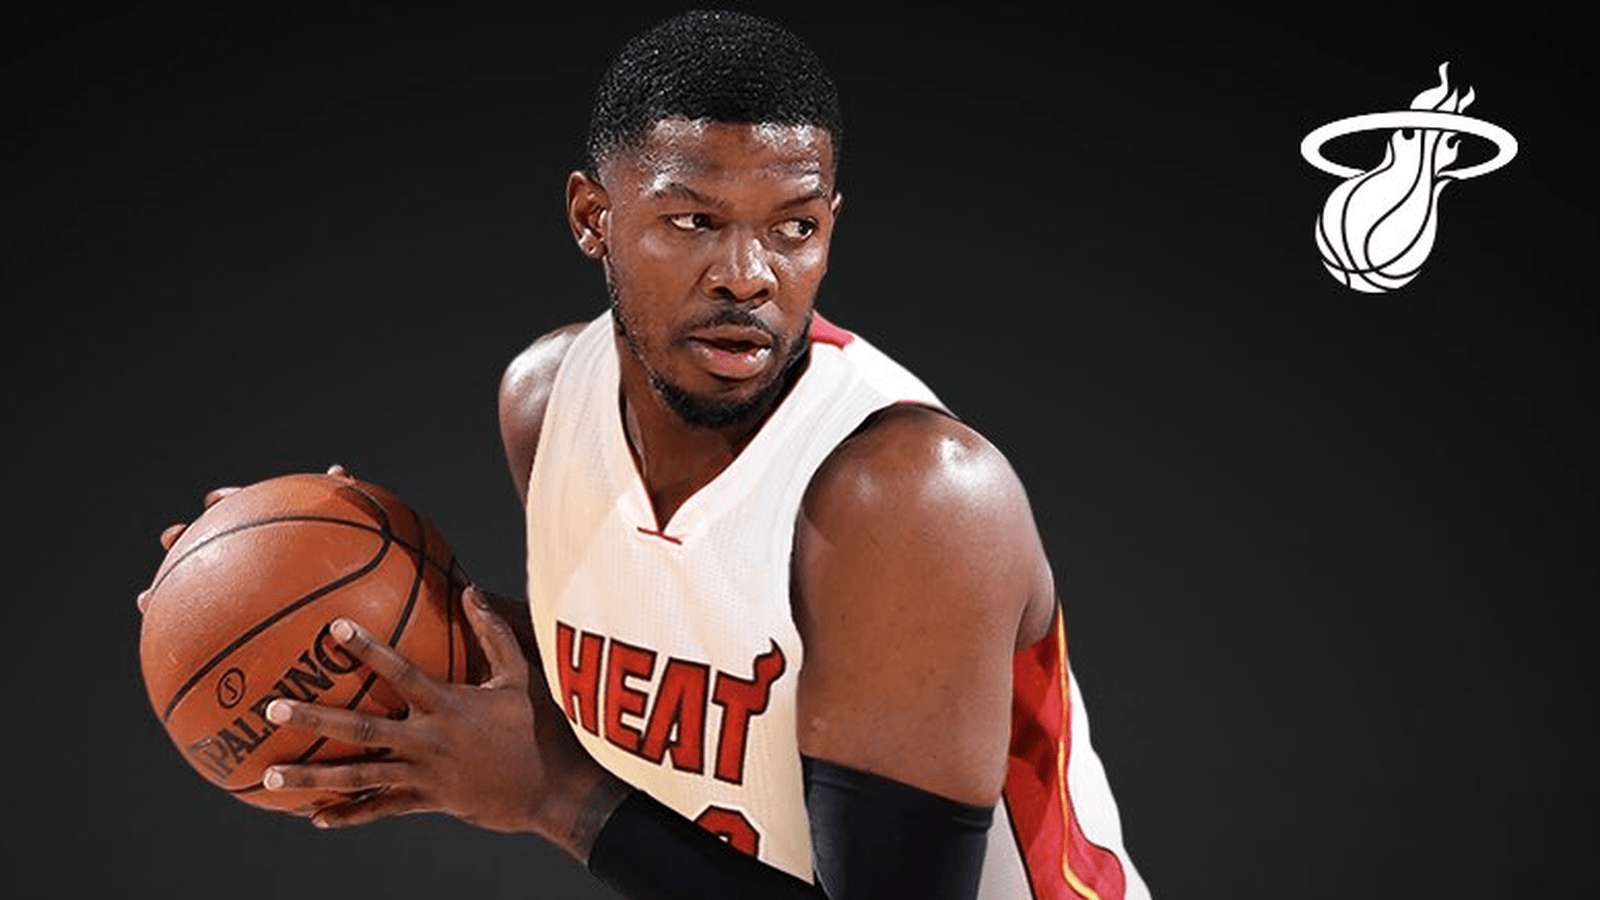 Miami Heat announce official signing of Joe Johnson